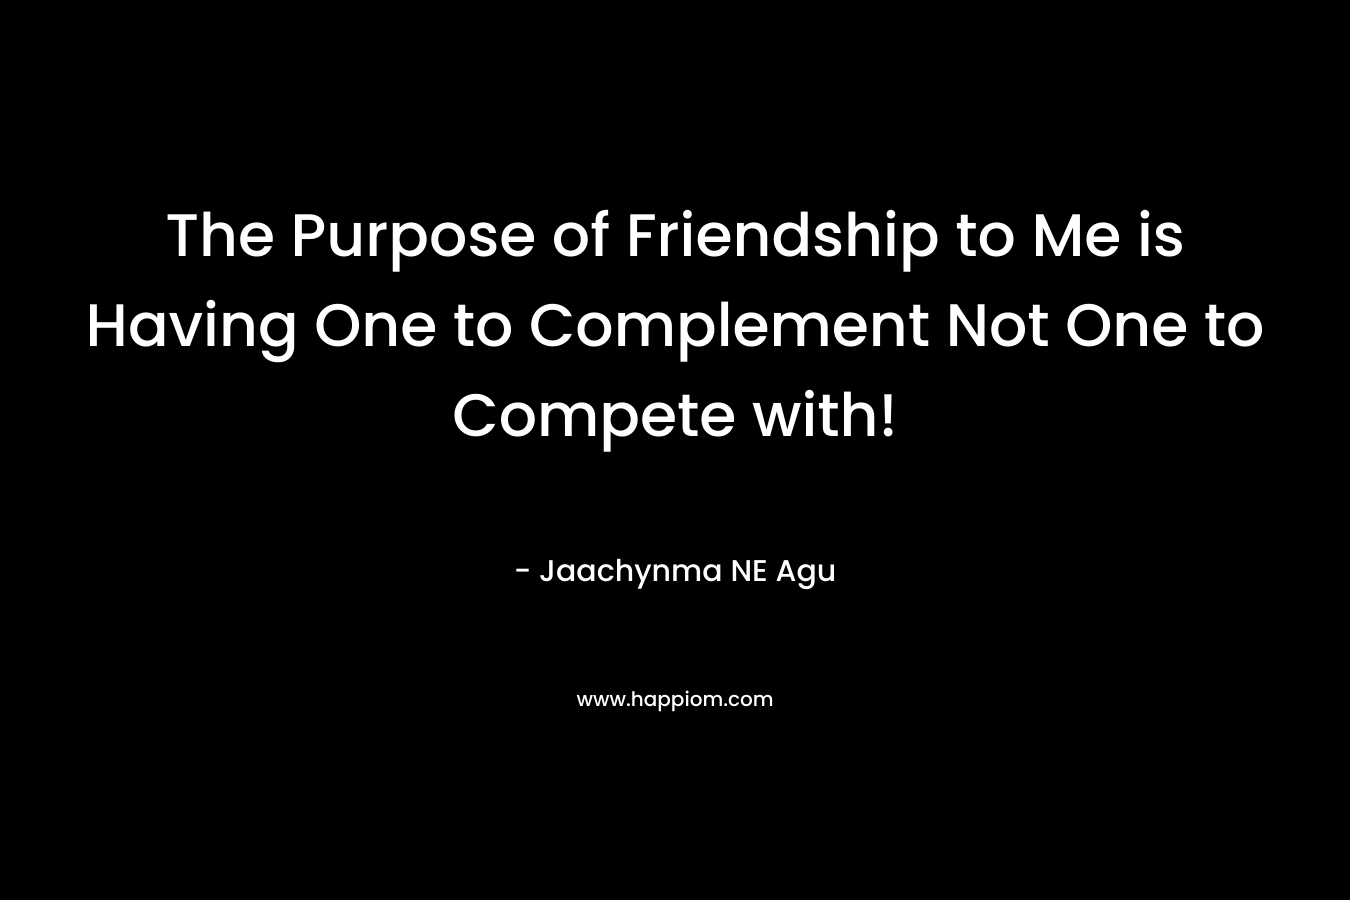 The Purpose of Friendship to Me is Having One to Complement Not One to Compete with!